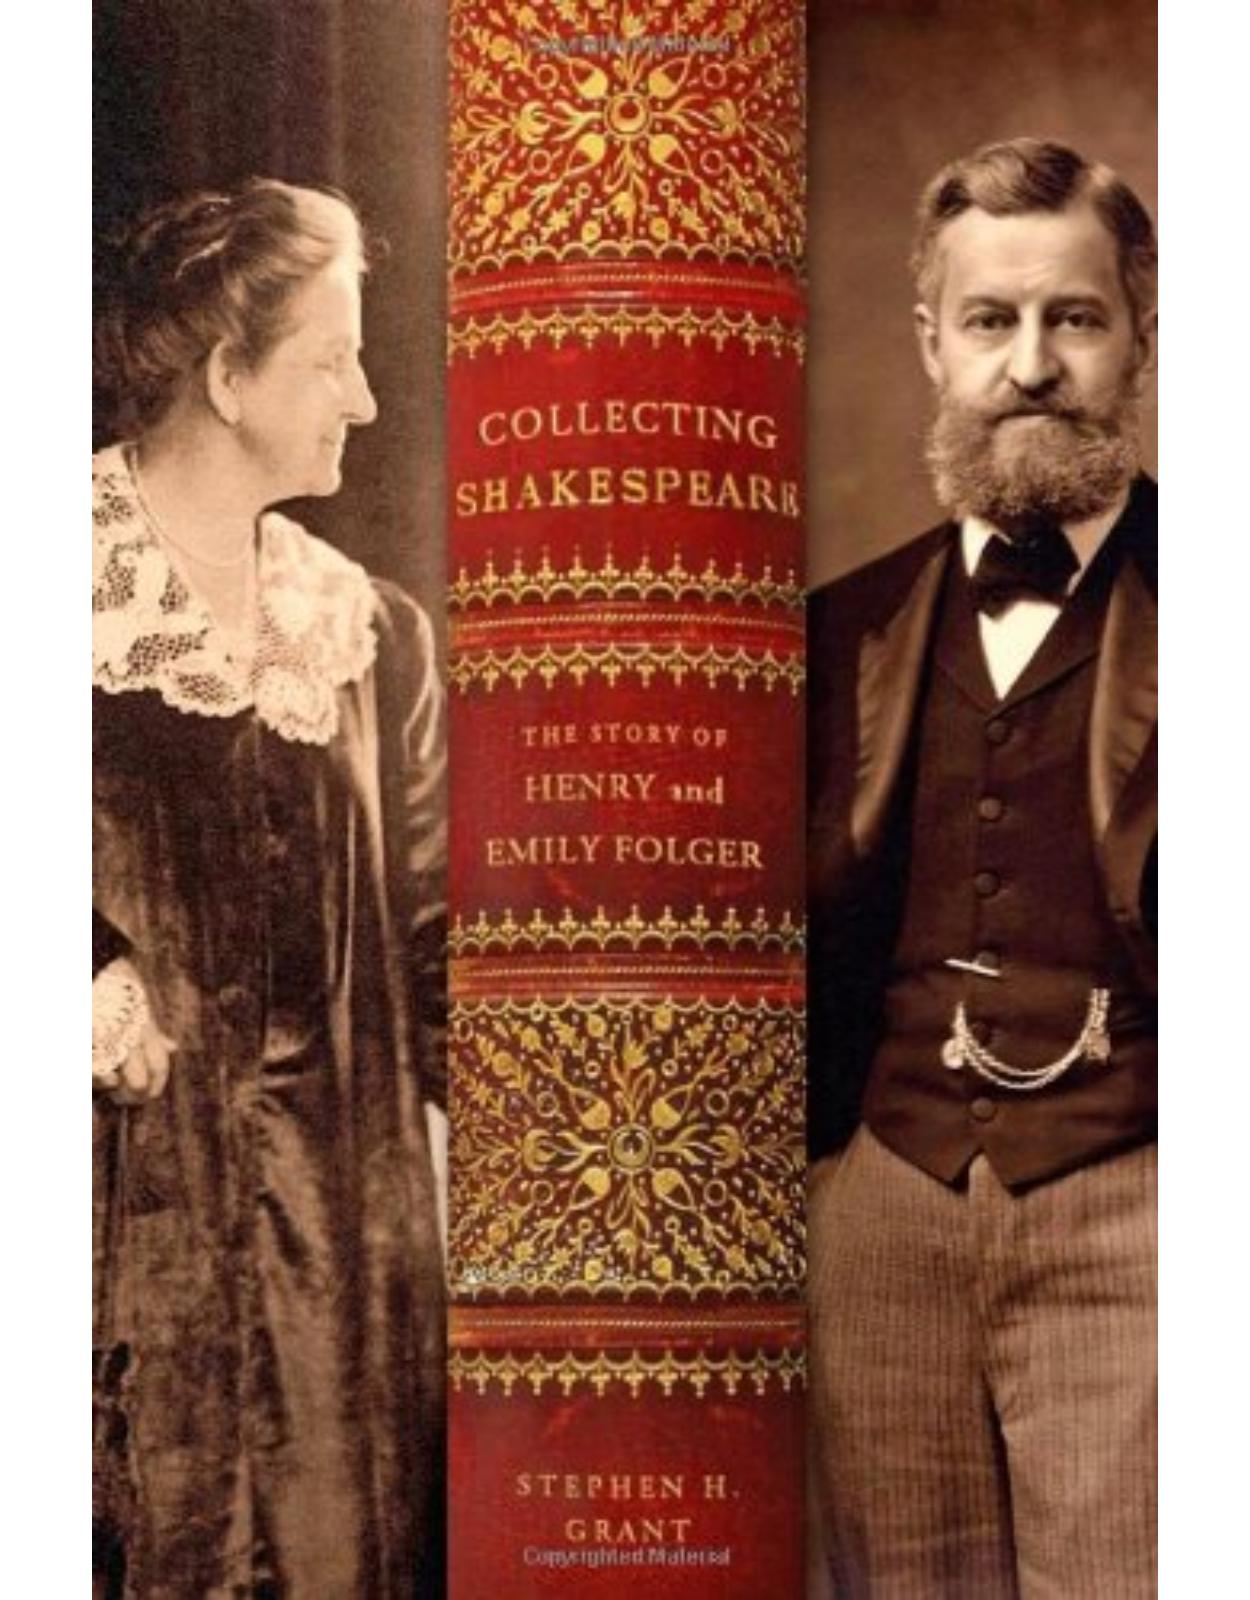 Collecting Shakespeare, The Story of Henry and Emily Folger